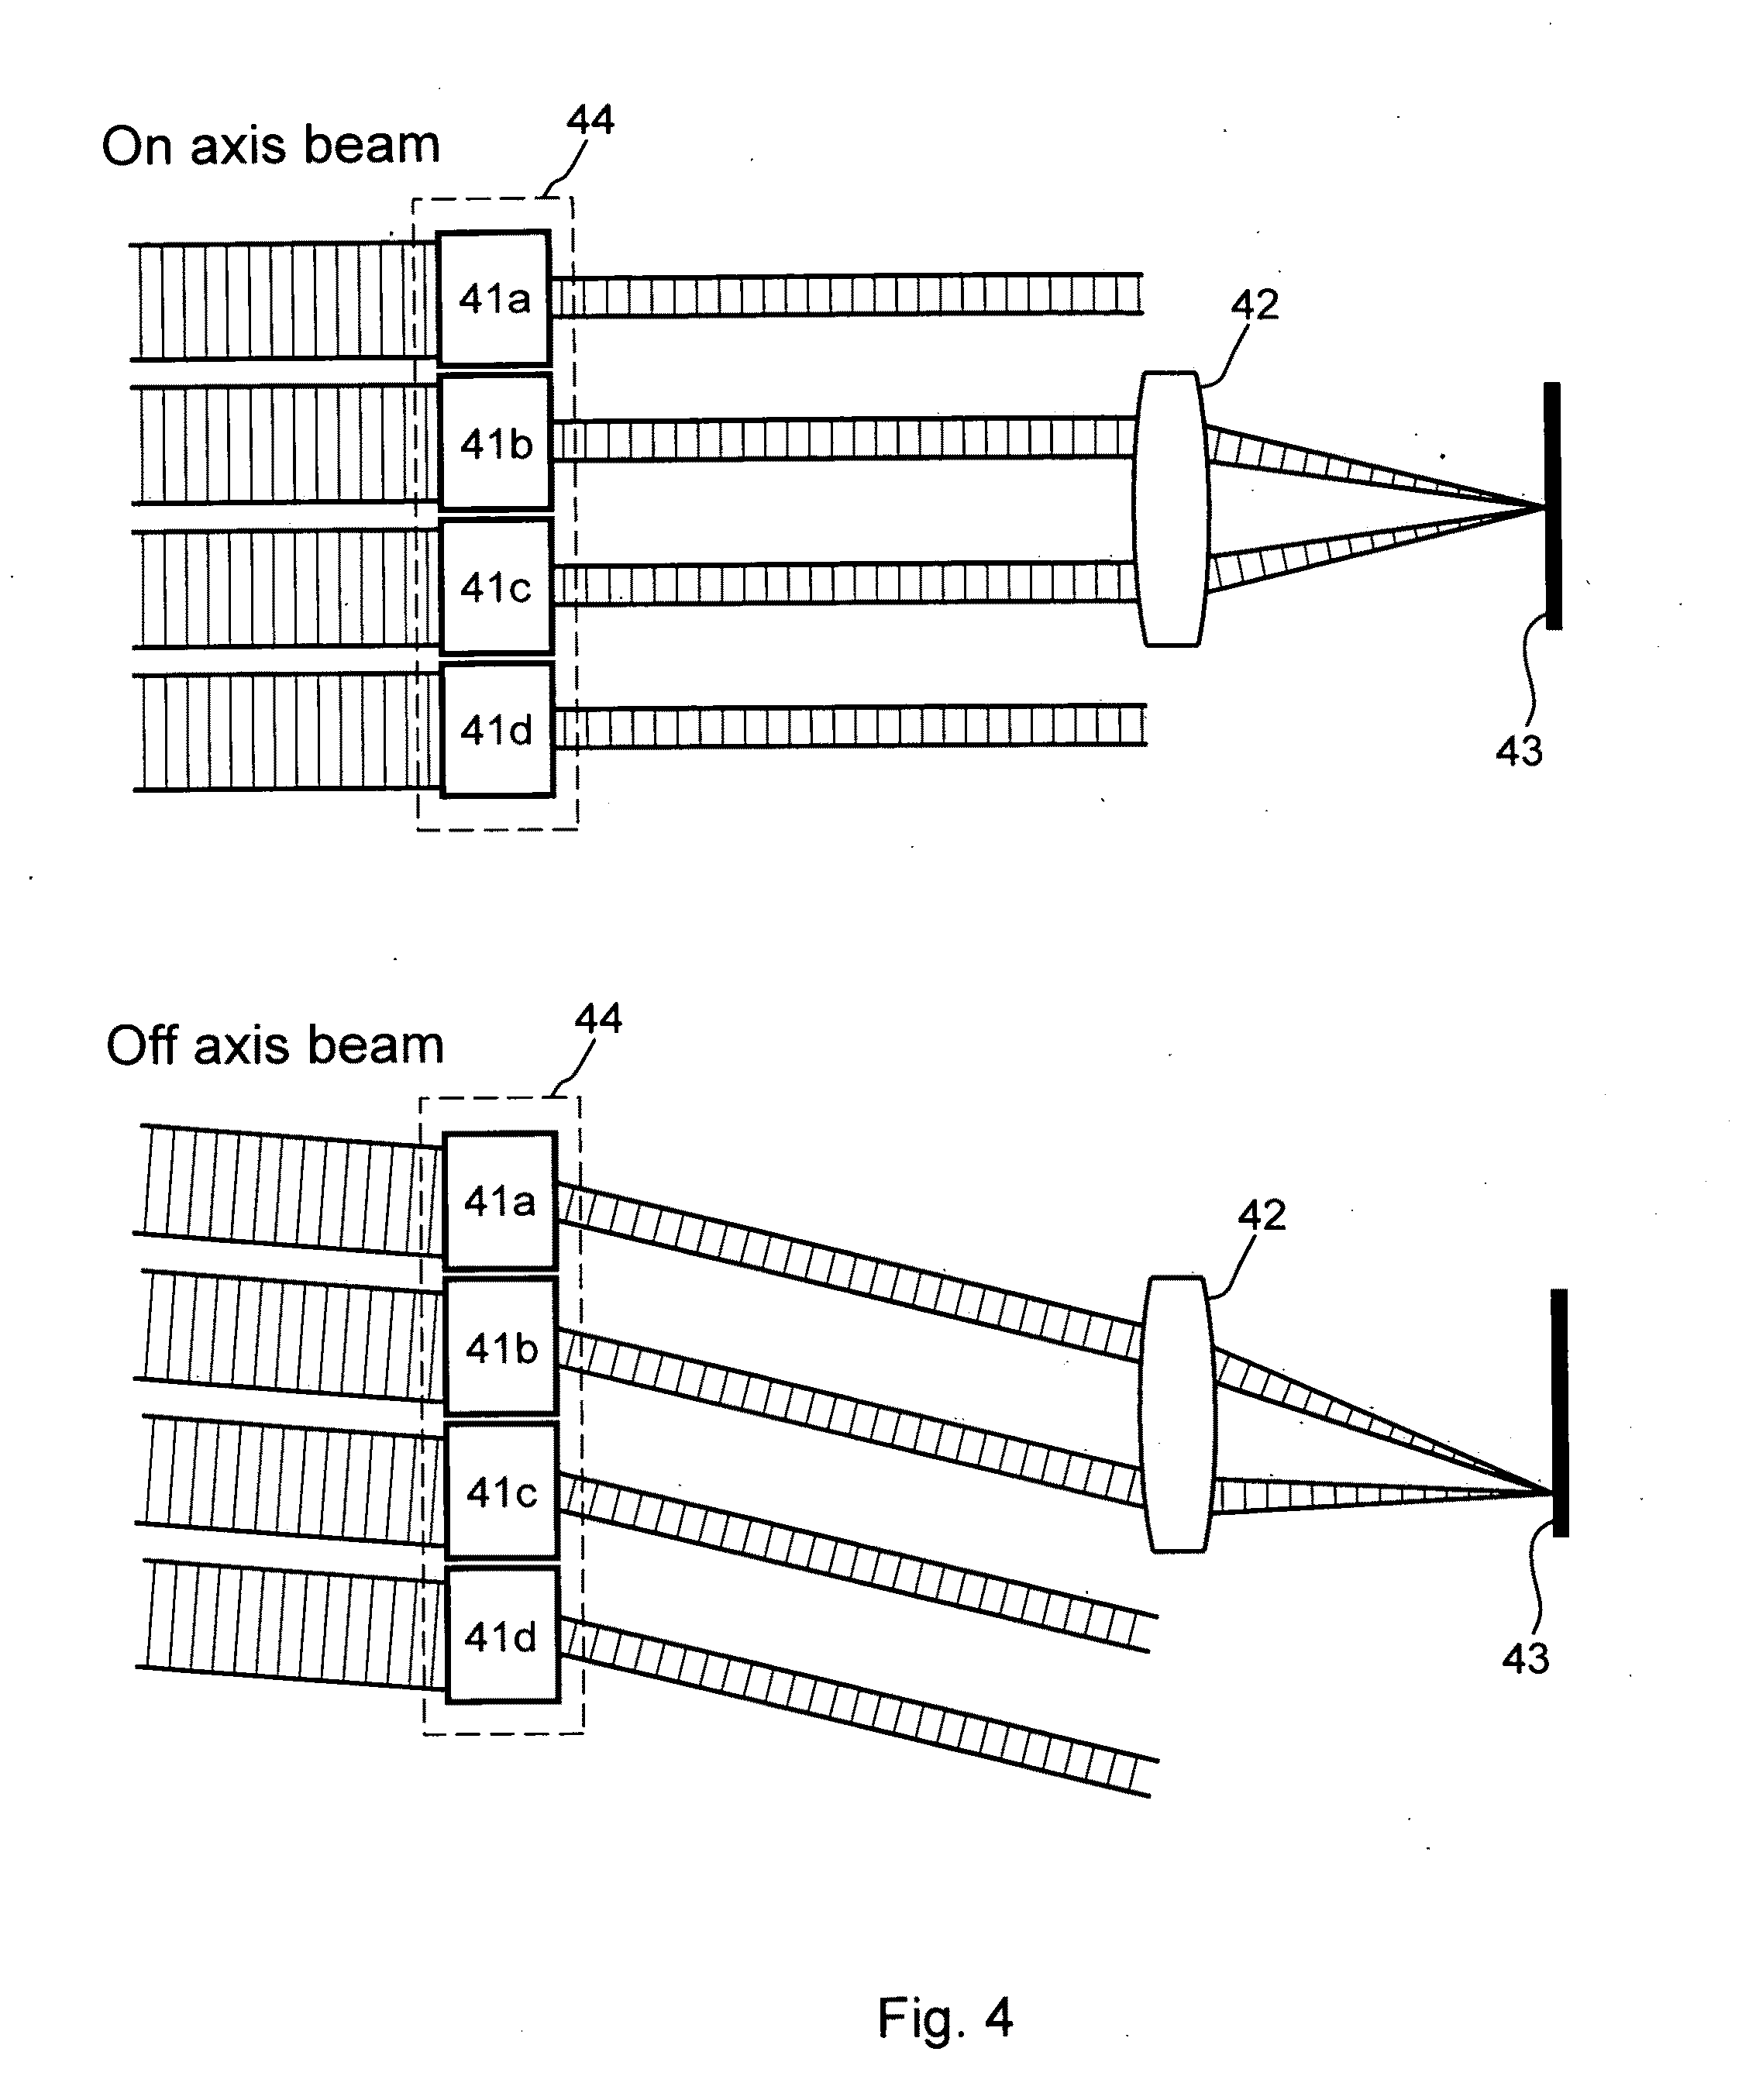 Optical apparatus for magnifying a view of an object at a distance